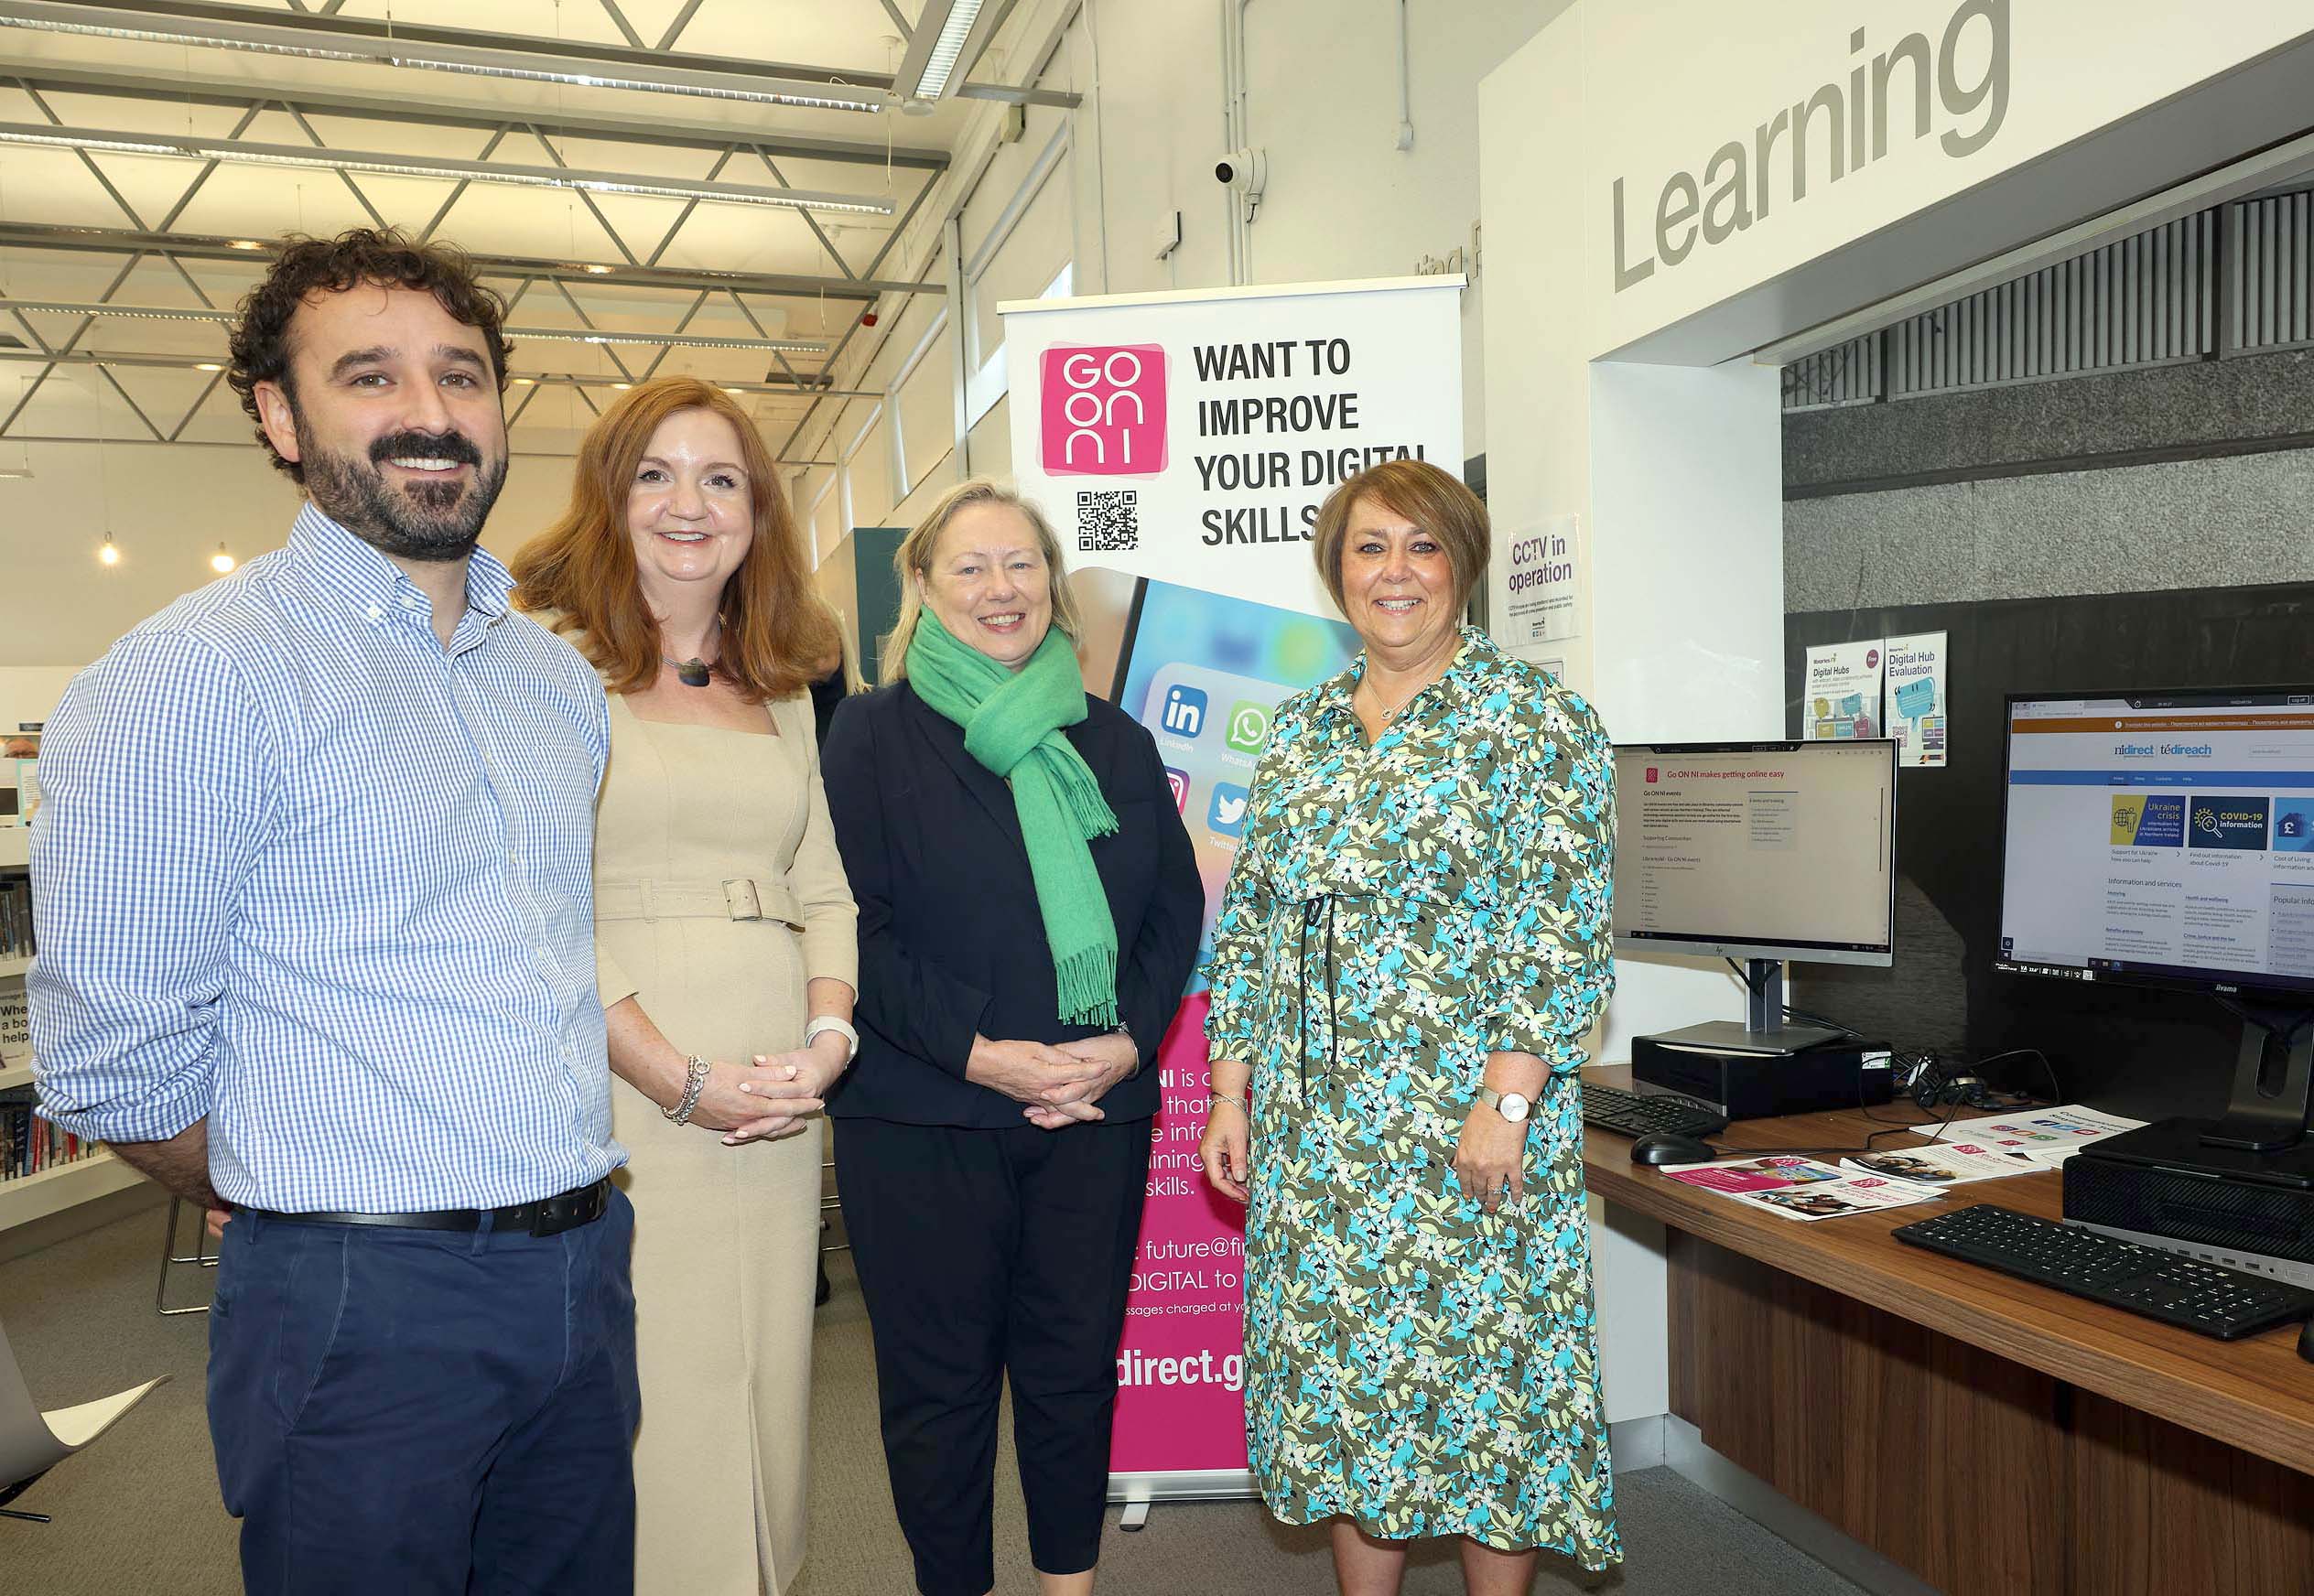 Paul Kelly (Senior Services Manager, Libraries NI), Head of the Civil Service Jayne Brady, Adrienne Adair (Director of Library Services, Libraries NI), Kim Aiken (Deputy Head of Services, Libraries NI)